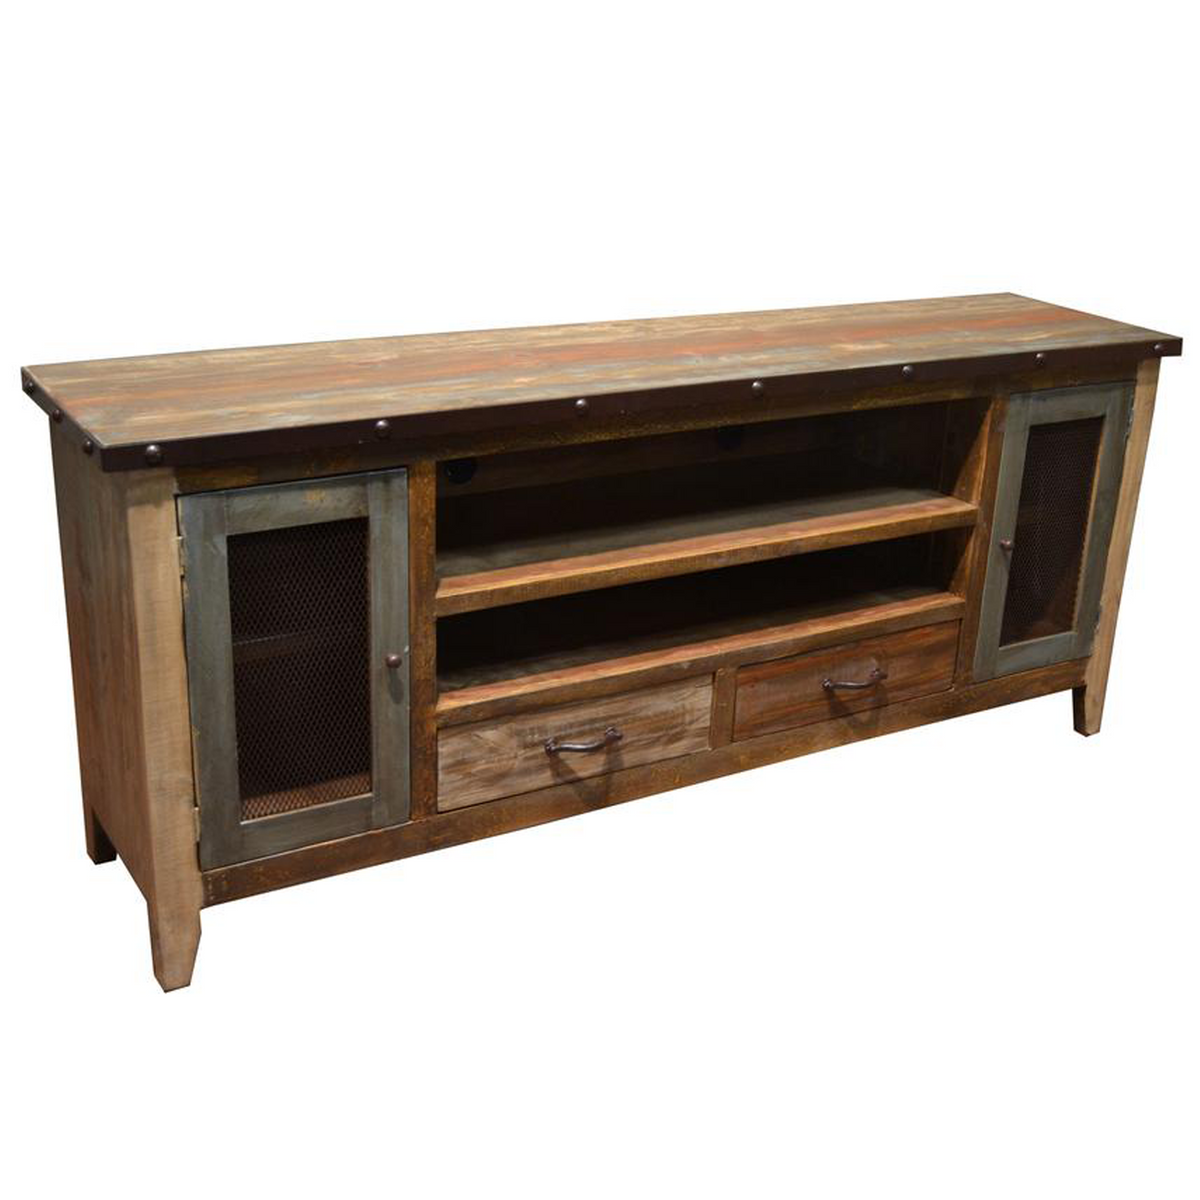 37cm High Reclaimed Wood TV Stand